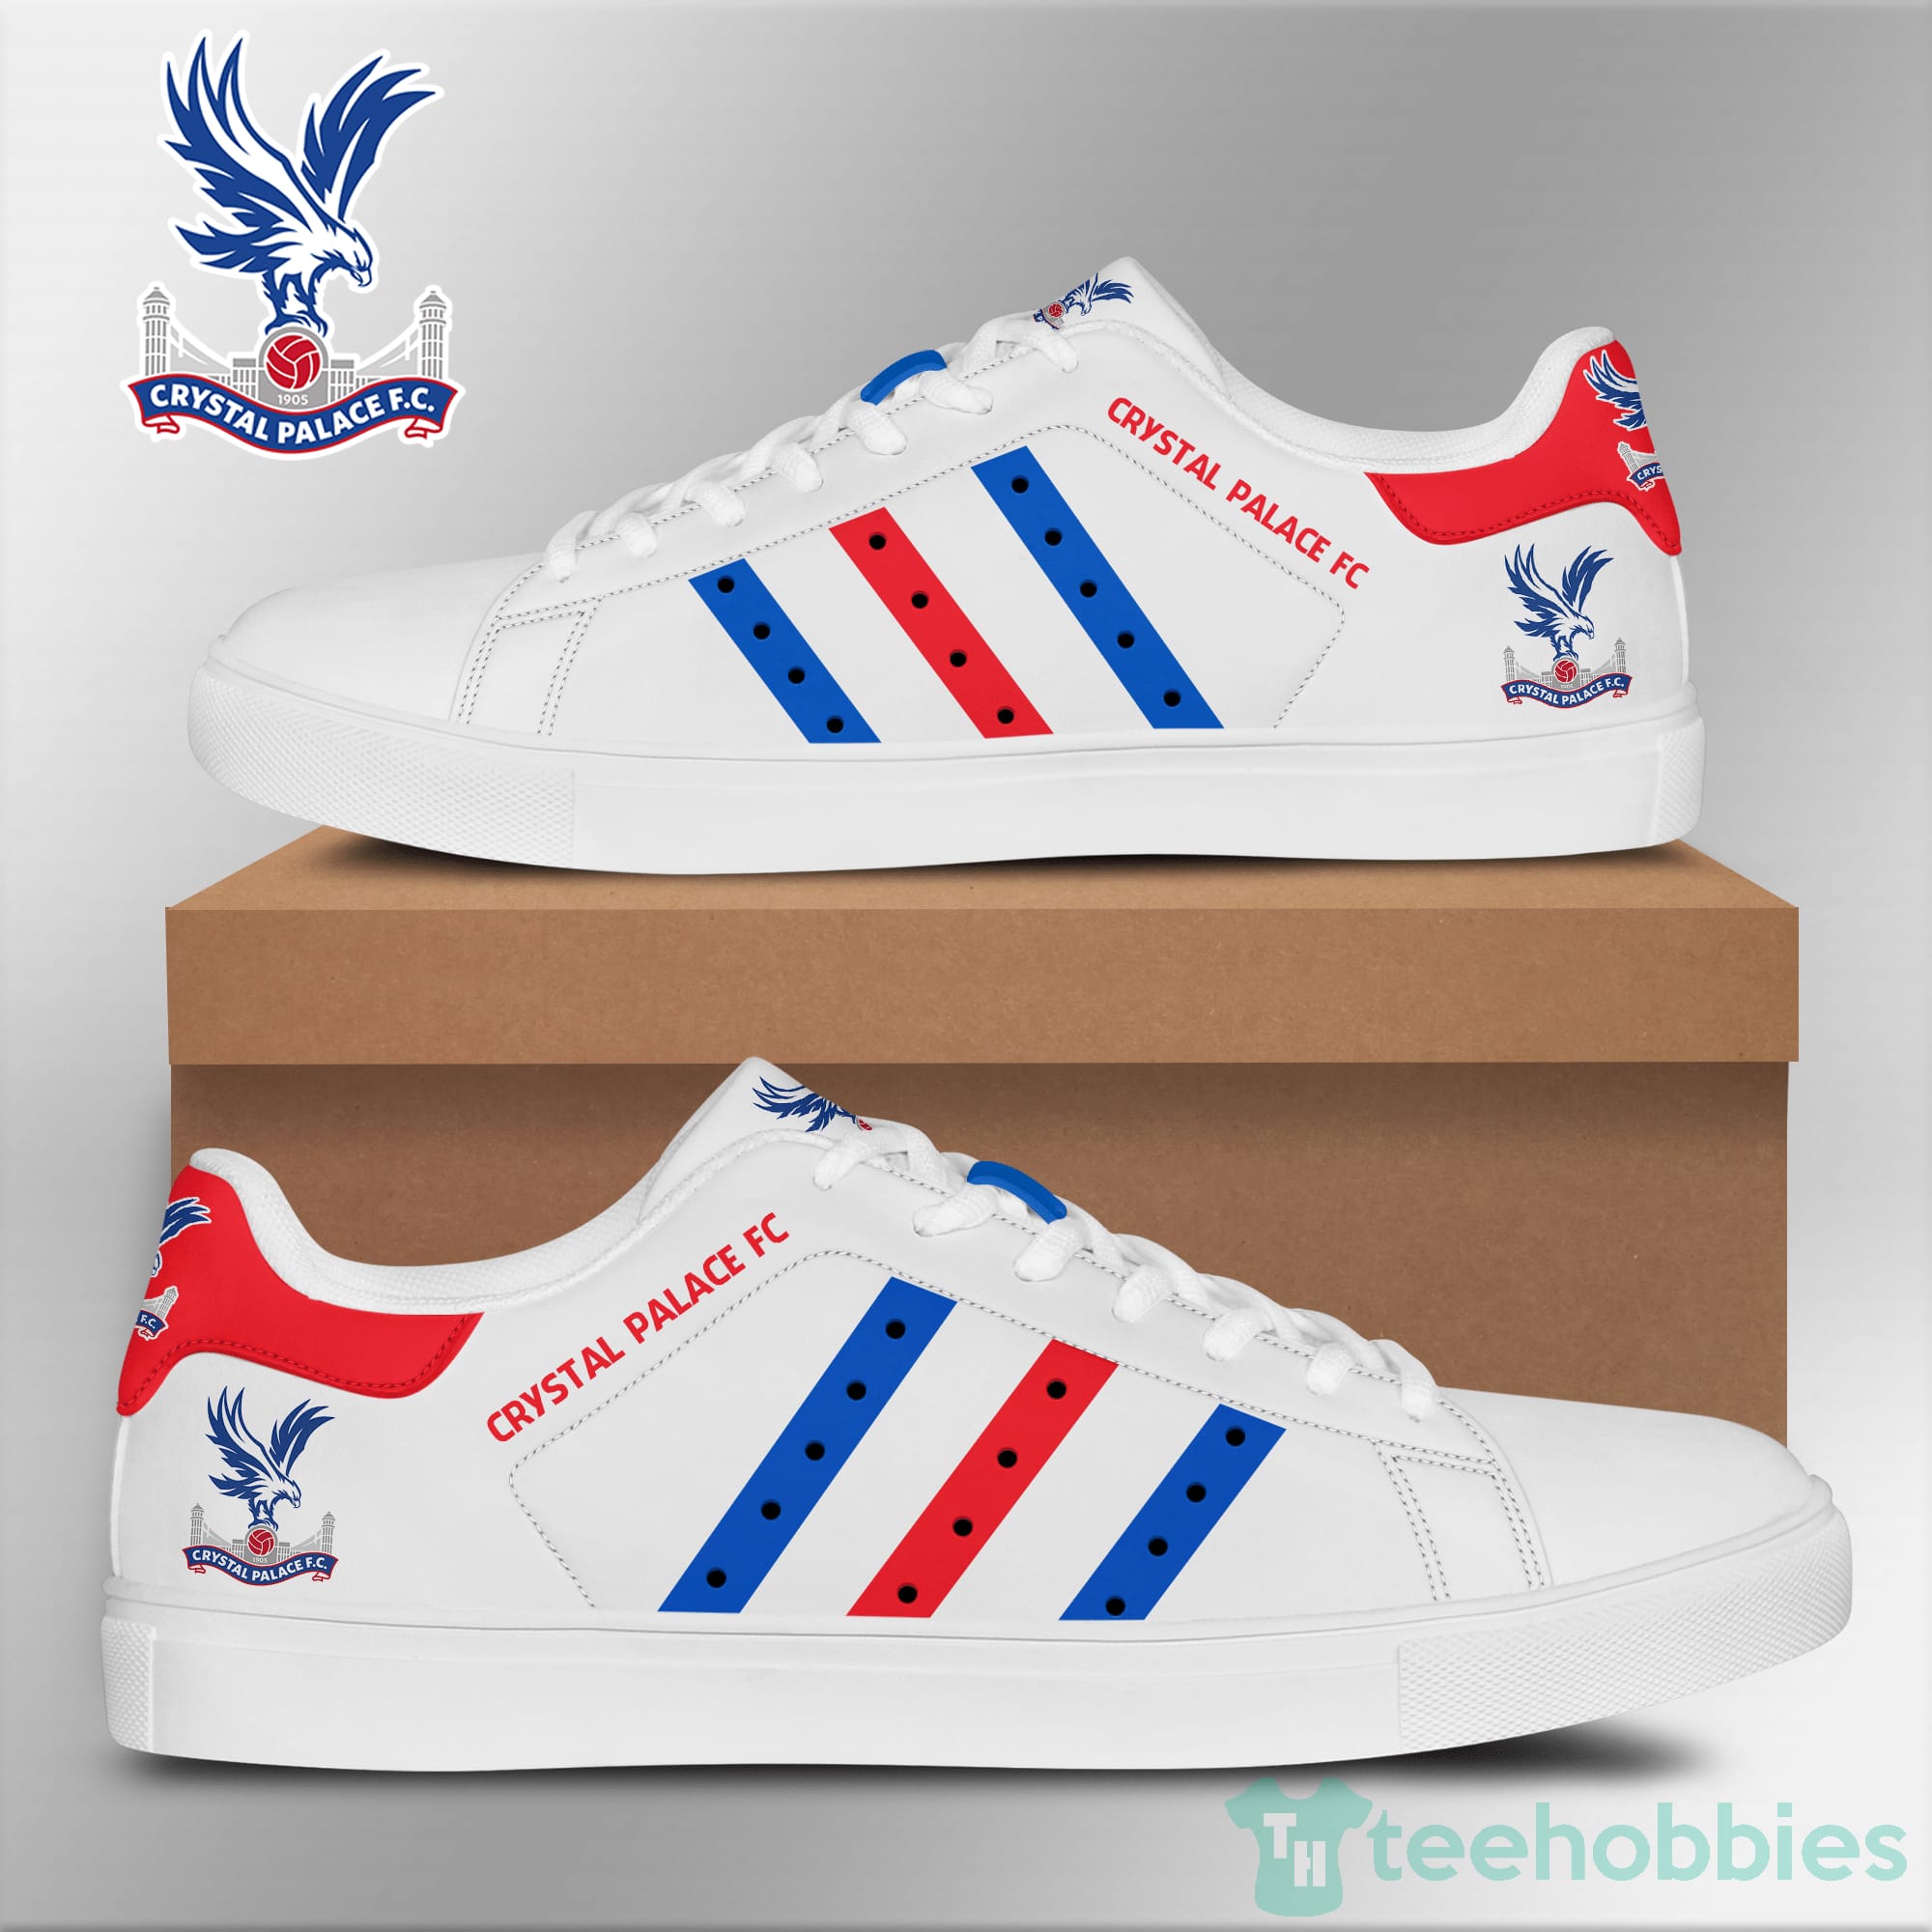 Crystal Palace Fc For Fans Low Top Skate Shoes